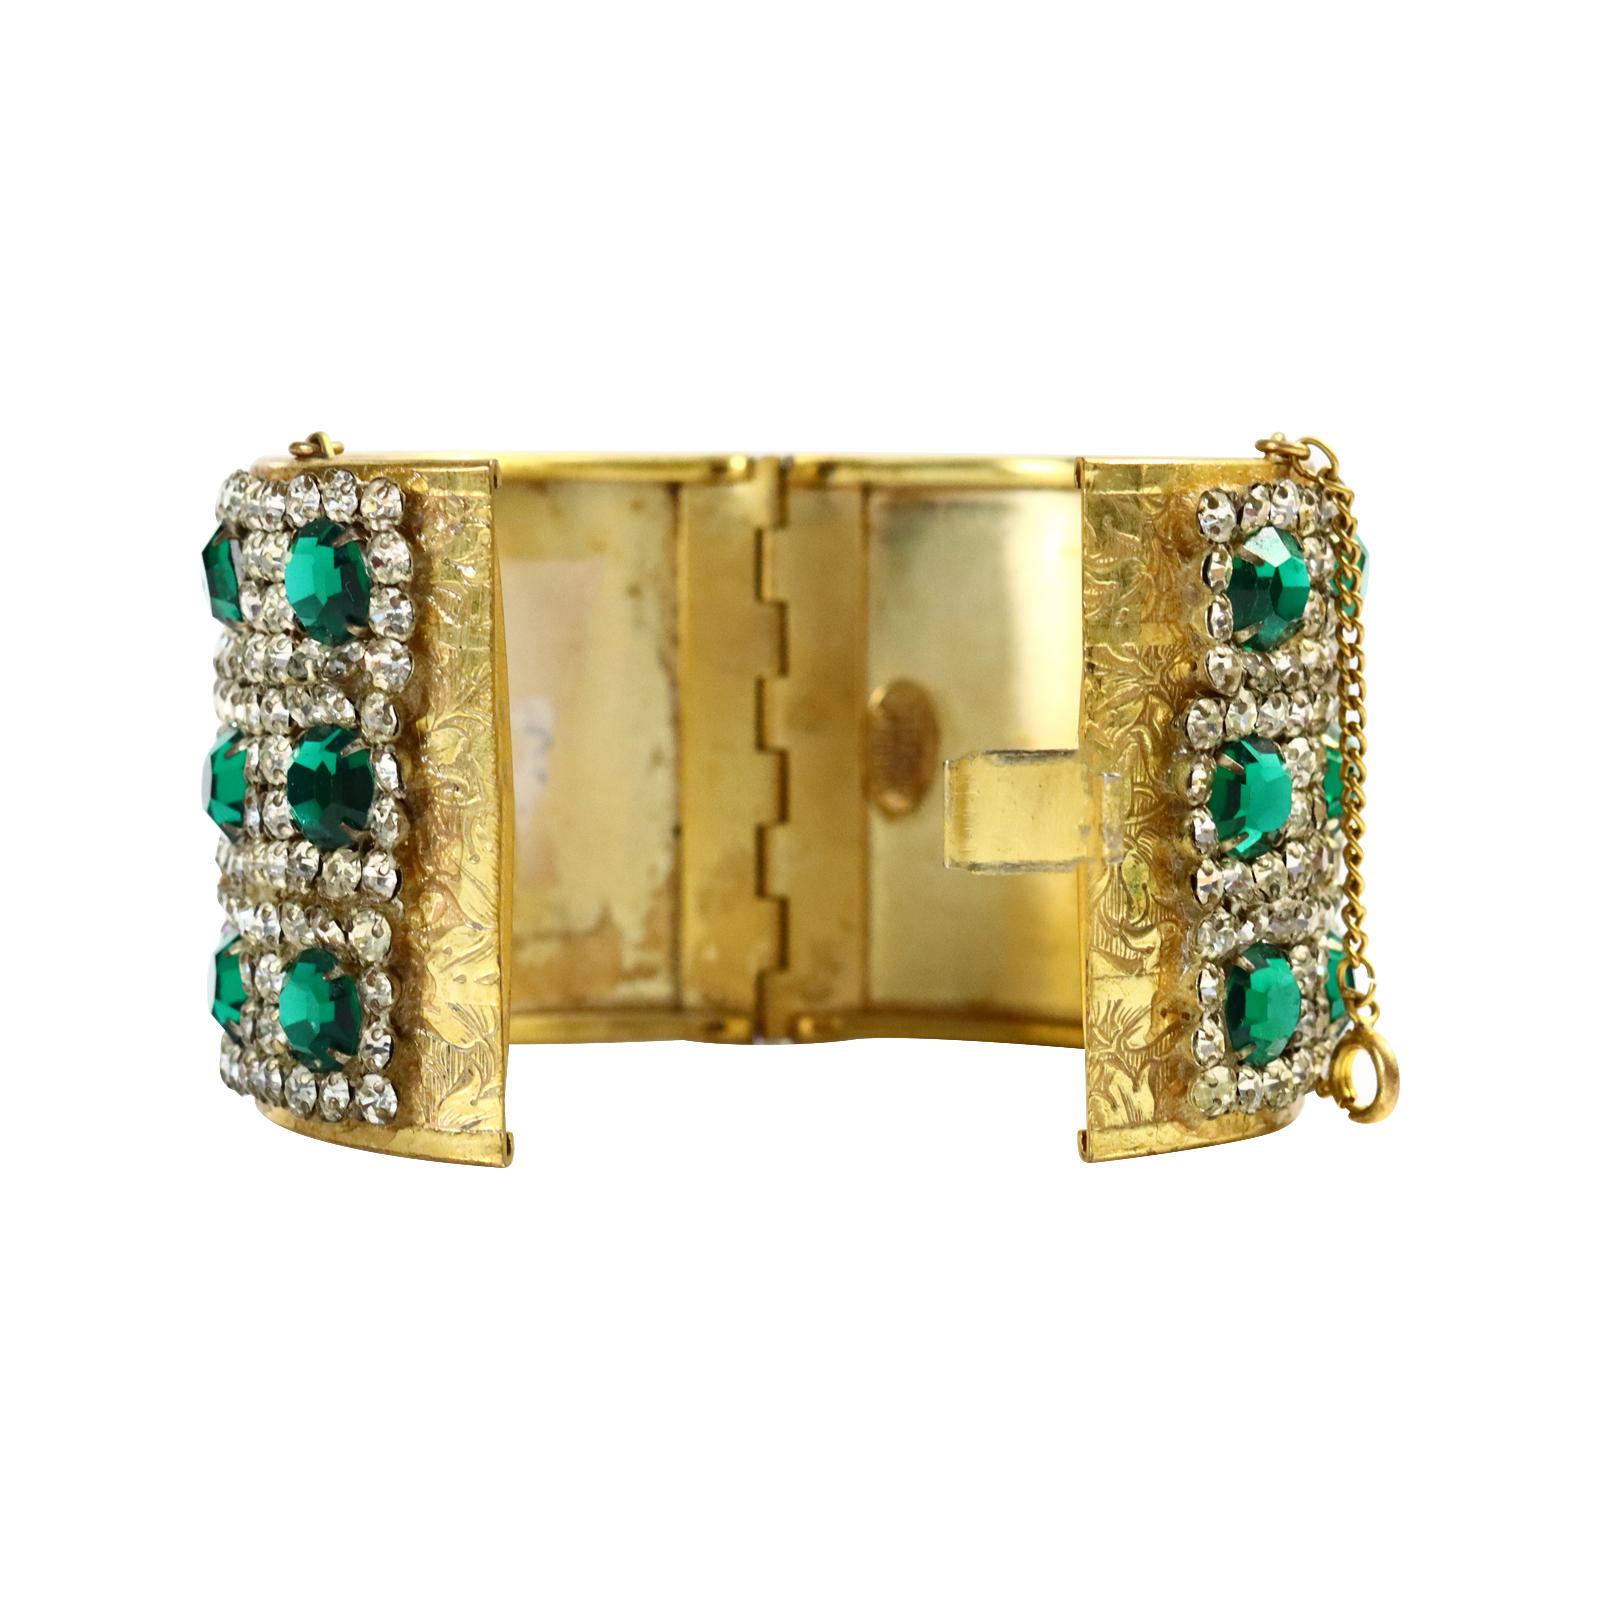 Vintage Miriam Haskell Gold Diamante Emerald Green Bracelet Circa 1950s In Good Condition For Sale In New York, NY